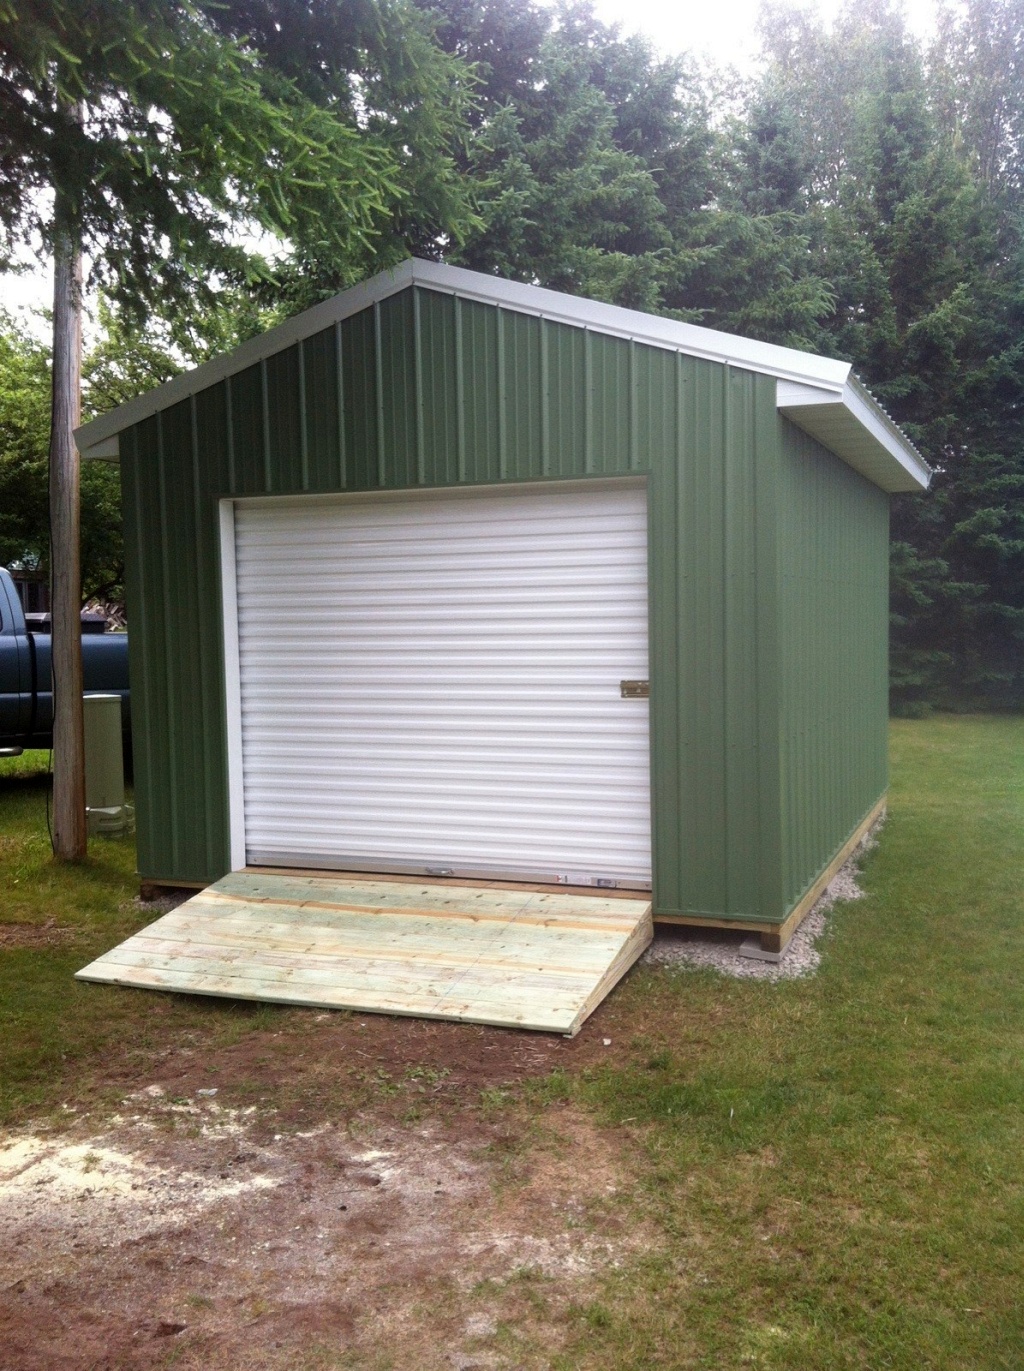 Premium Pole Buildings and Storage Shed's 12 by 16 Maintenance-free building in green!